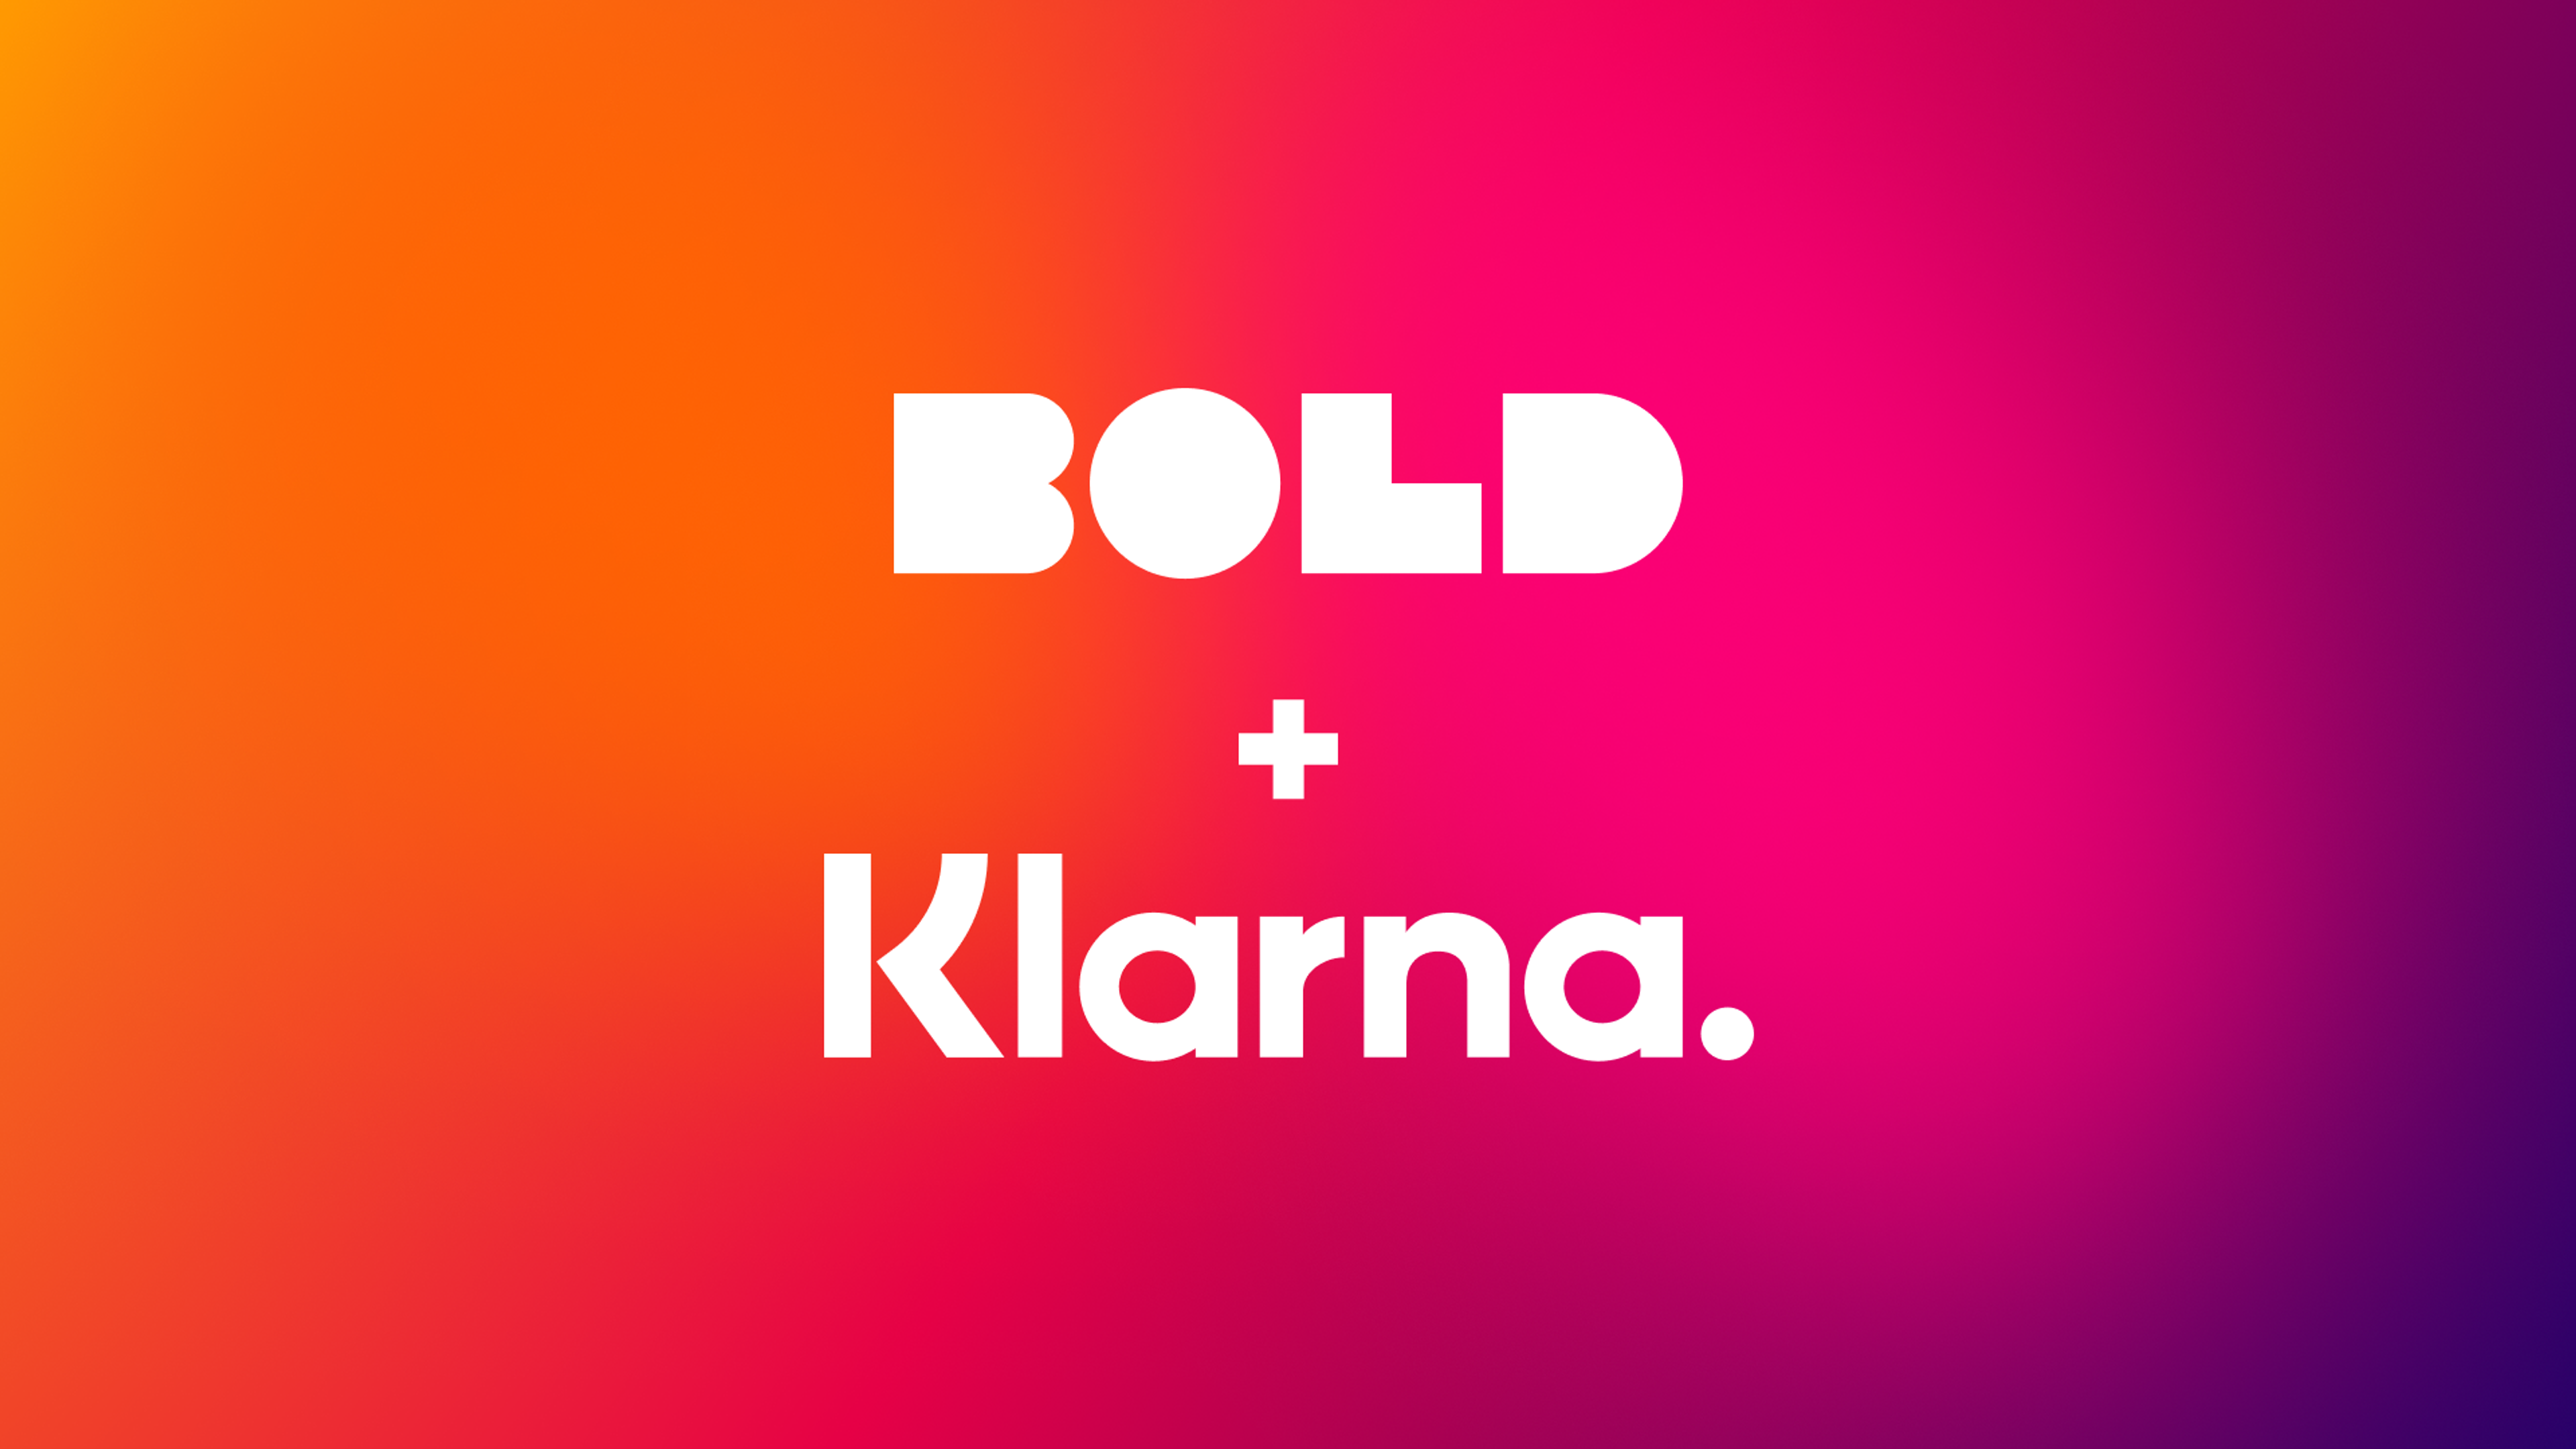 The words Bold + Klarna printed on an orange and red background